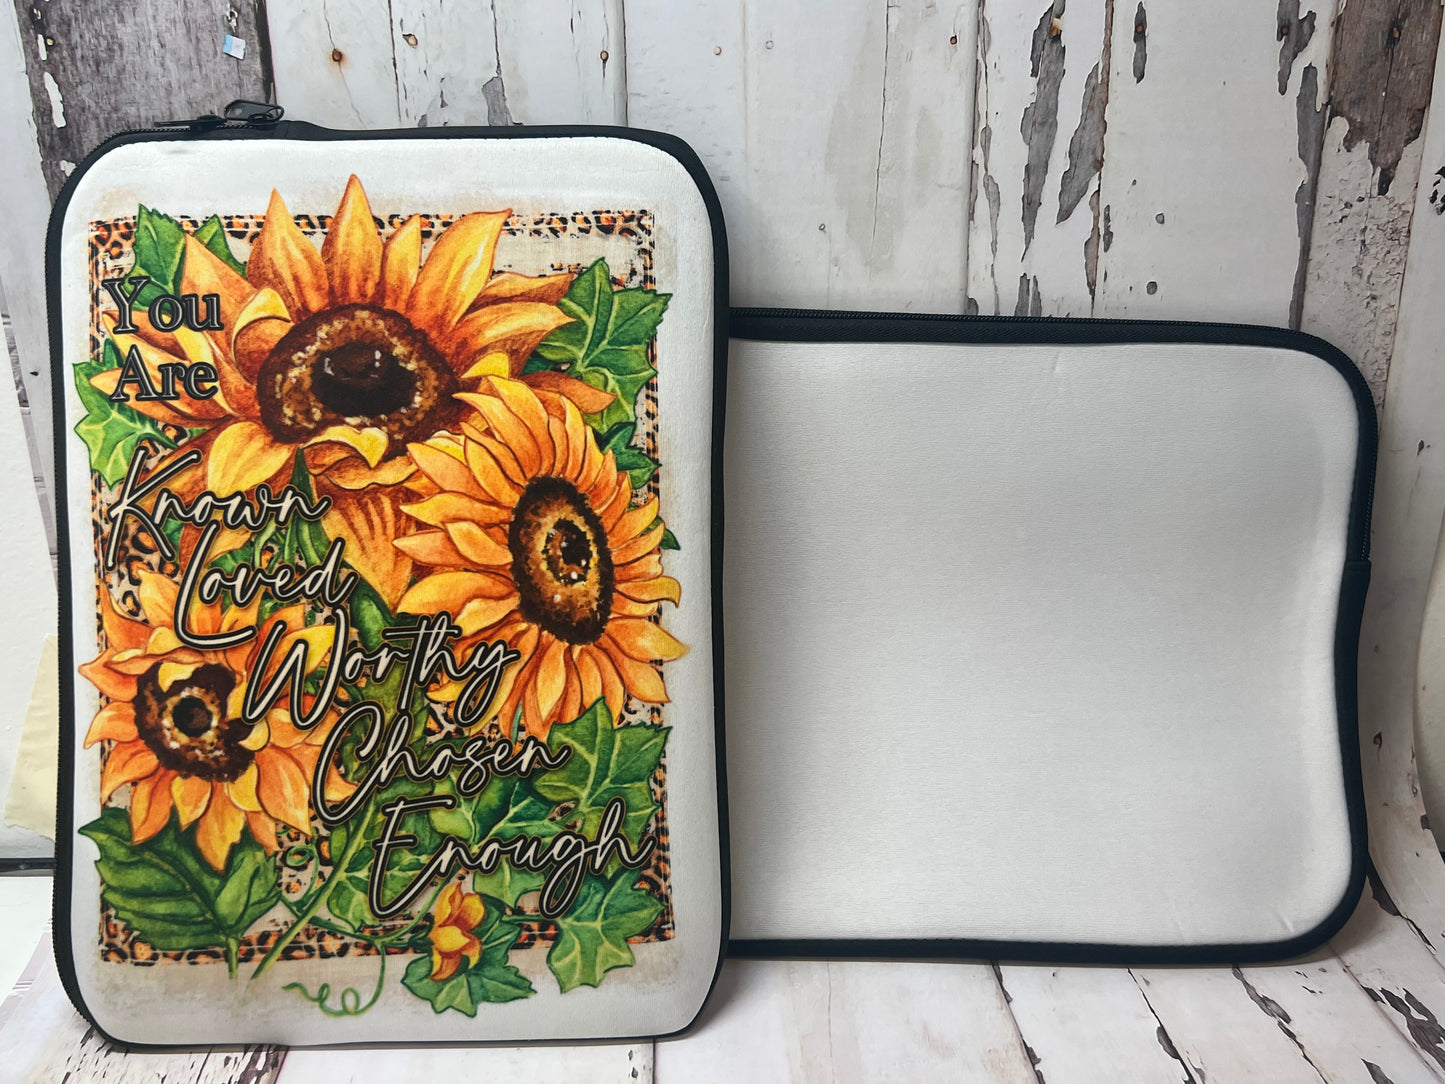 Laptop/Tablet Sleeve | Sublimation